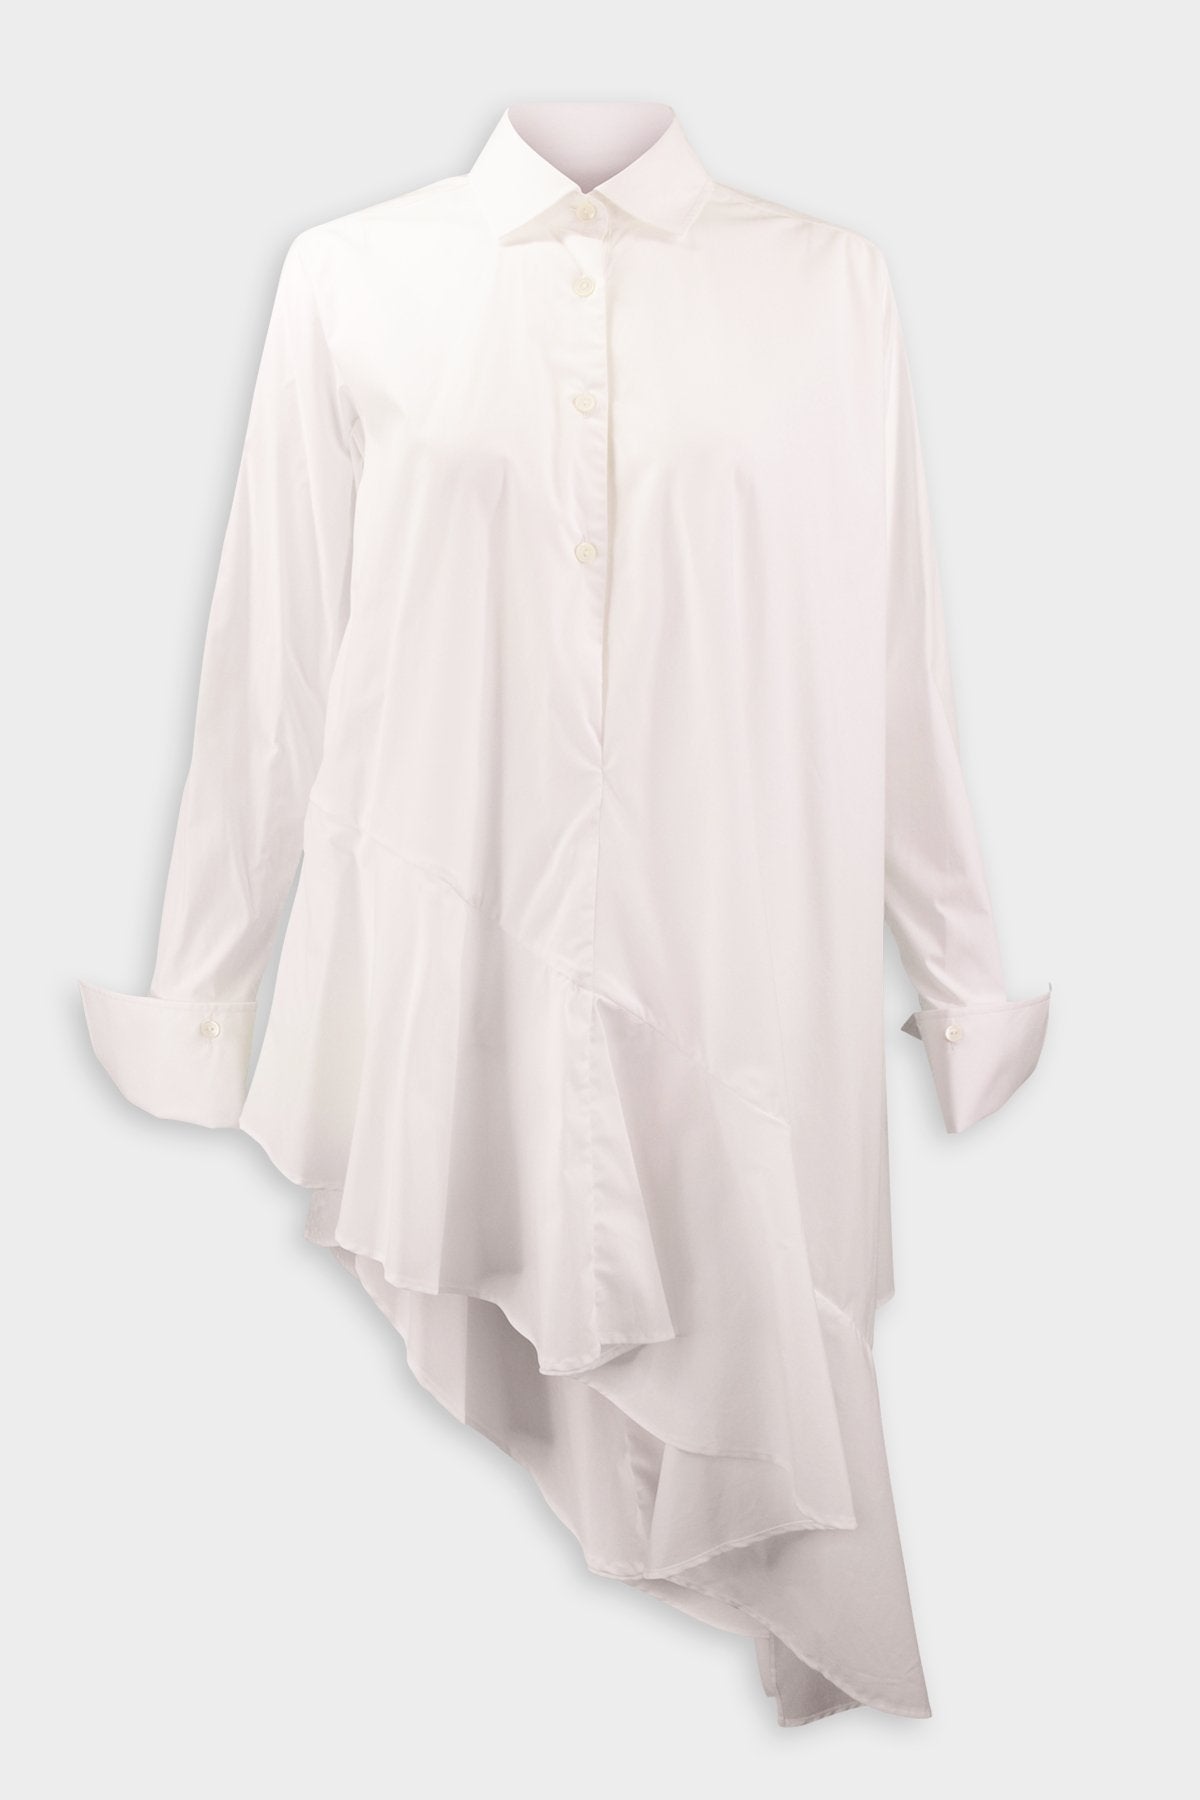 Spicy Shirt in White - shop-olivia.com